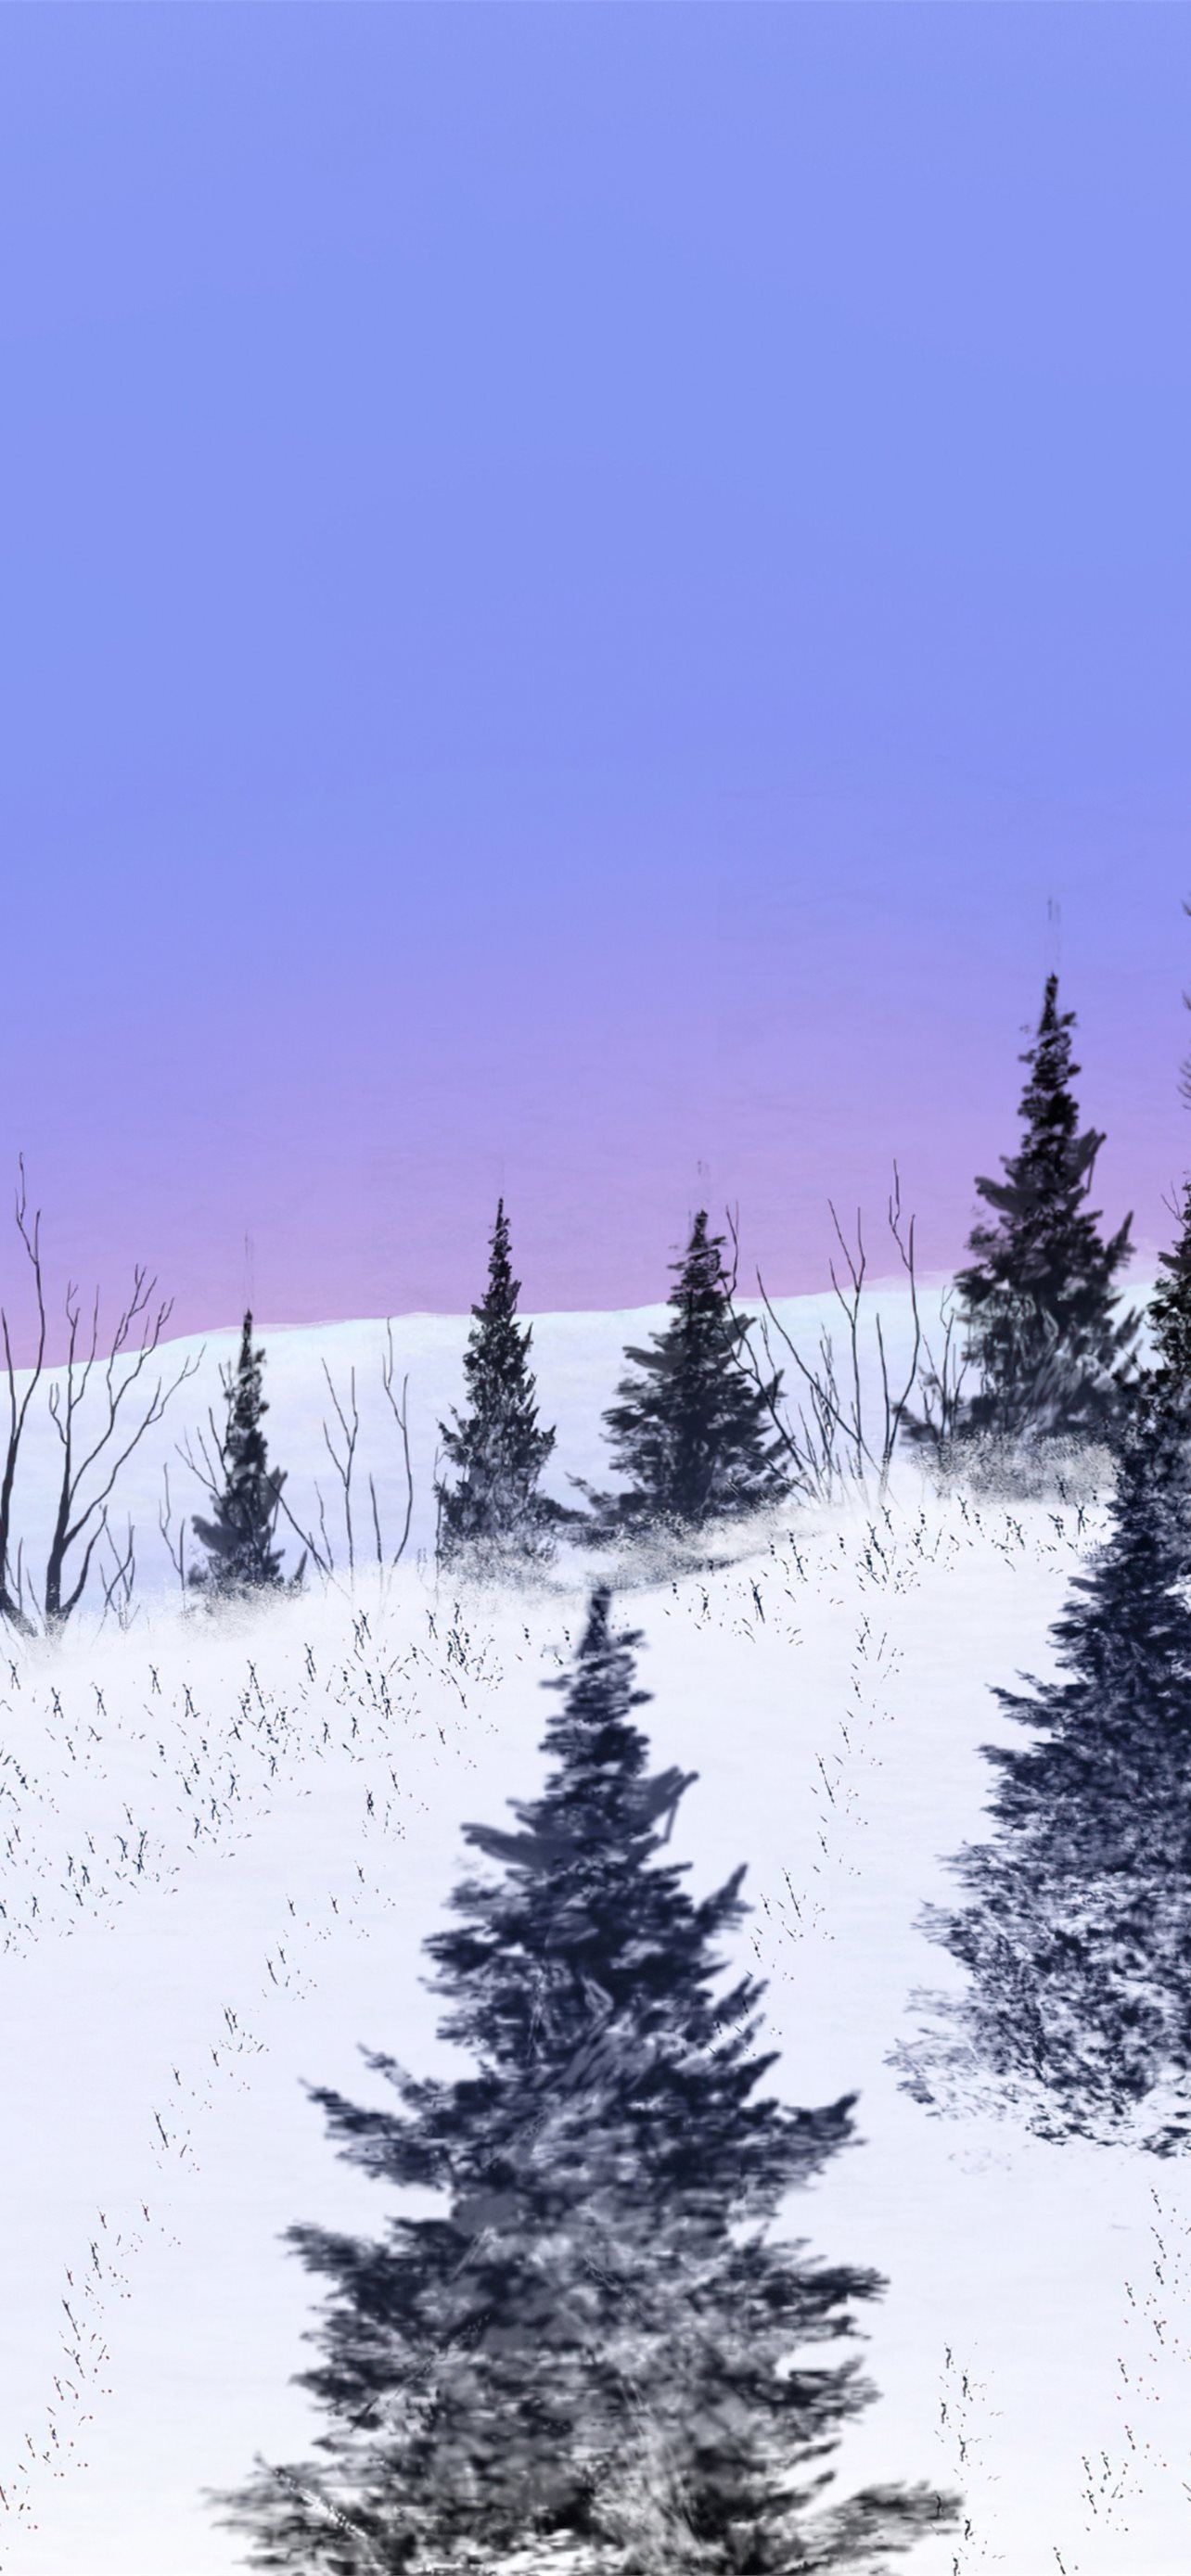 A snowy landscape with trees and a purple sky. - Winter